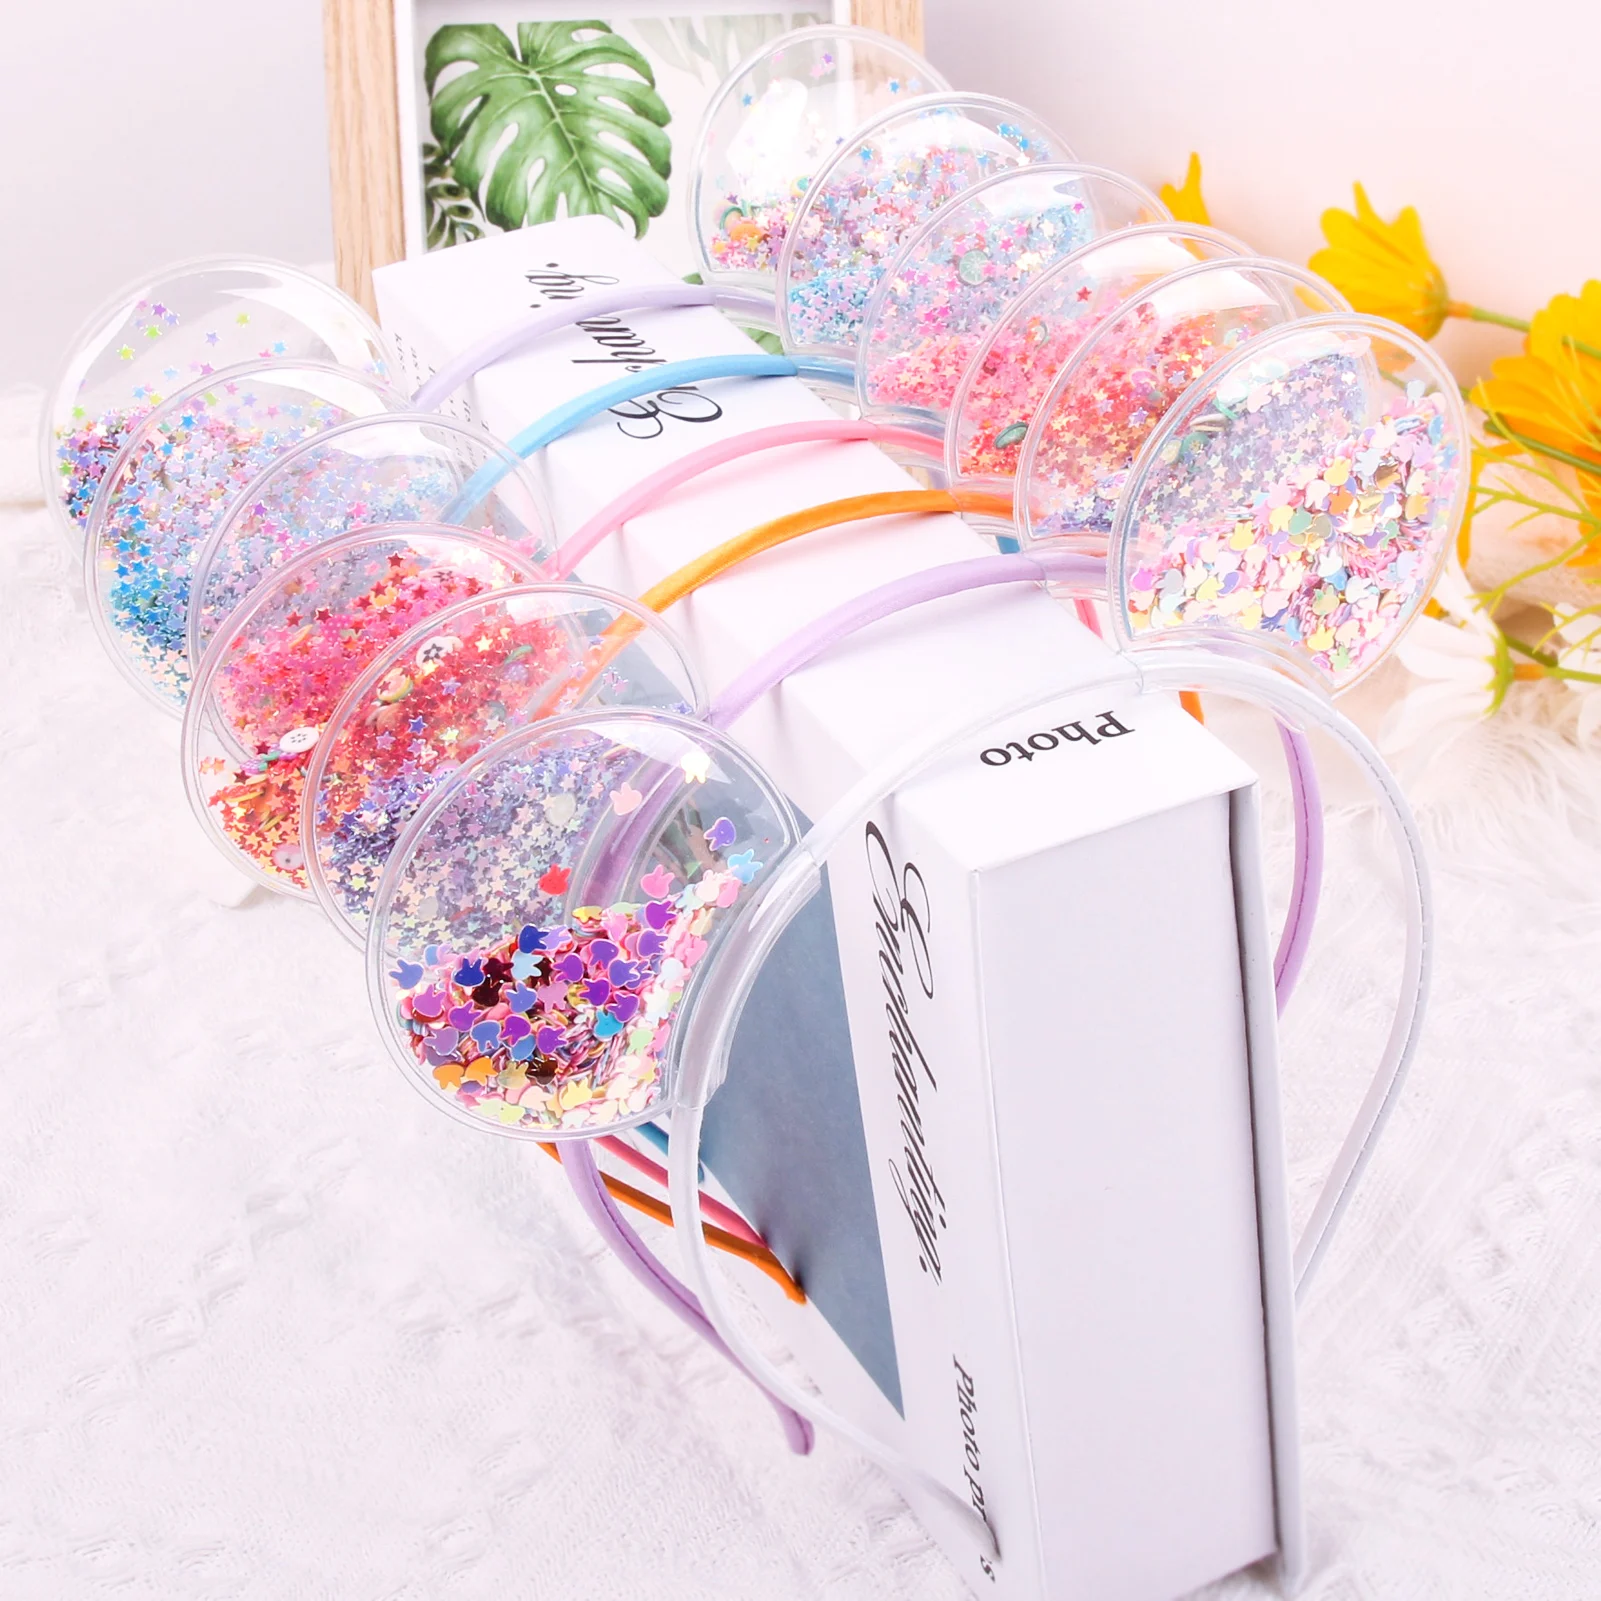 Candygirl Transparent Cat Ears Headband Quicksand Bows Hair Hoop Cute Colorful Sequins Hairbands Girls Princess Hair Accessories candygirl fashion girls shiny glitter 0 8cm hair bands cute hair hoops party hairbands lovely kids gifts hair accessories